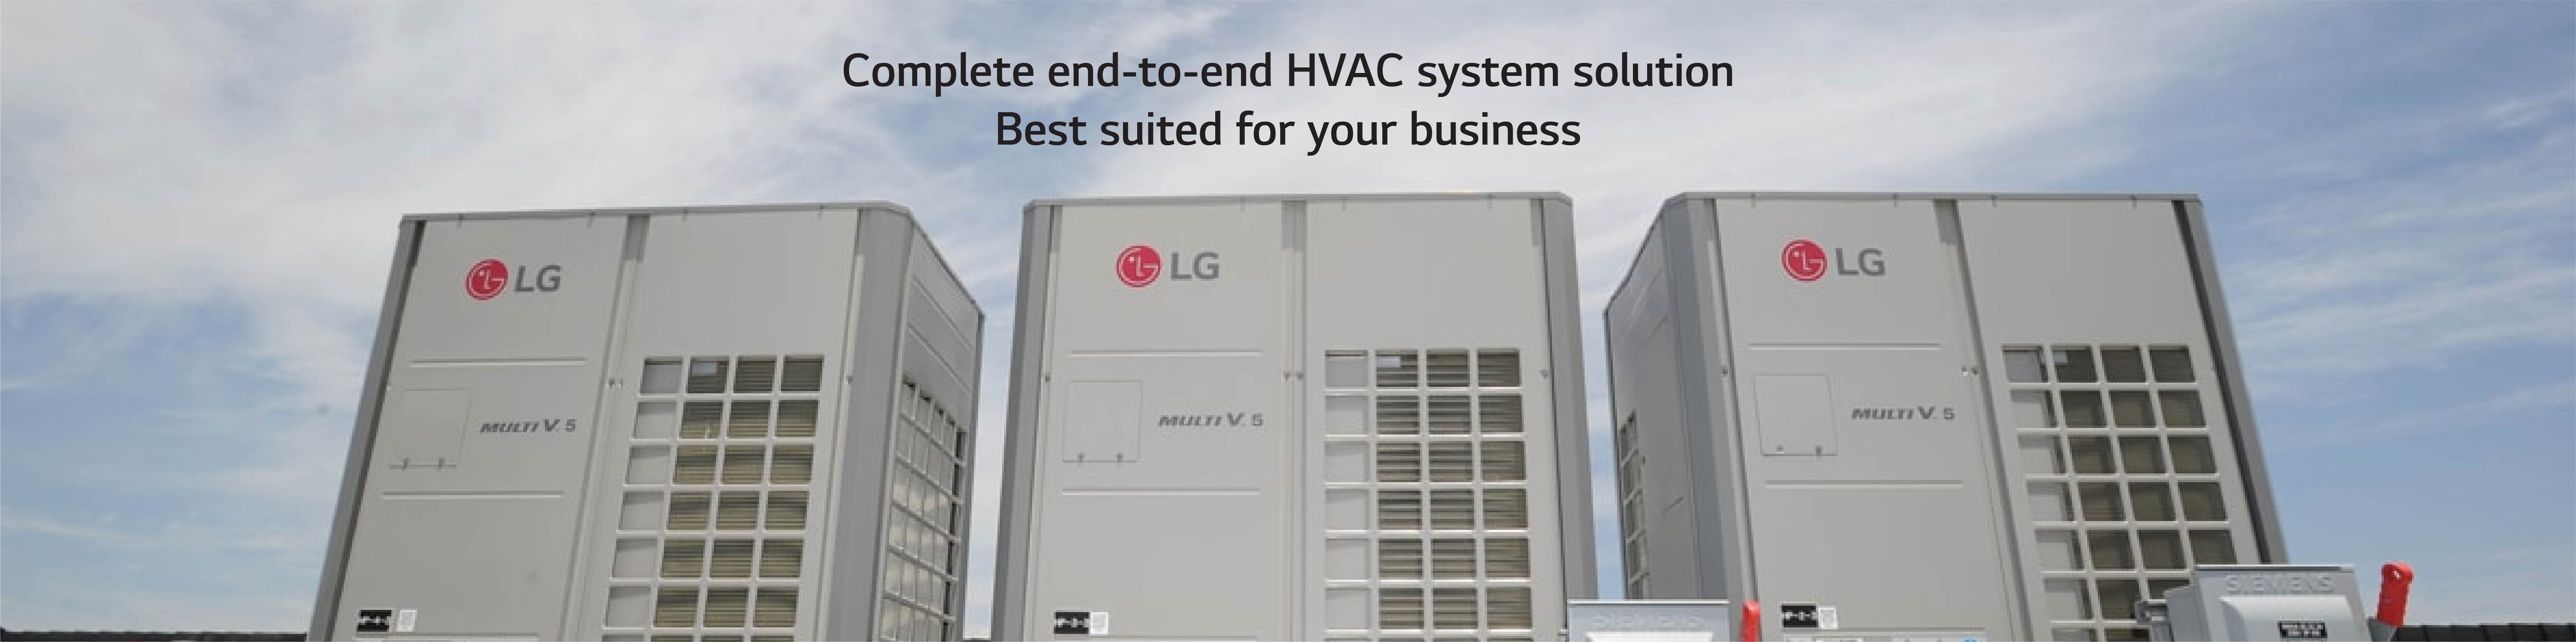 LG HVAC Options Best Suited For Your Business